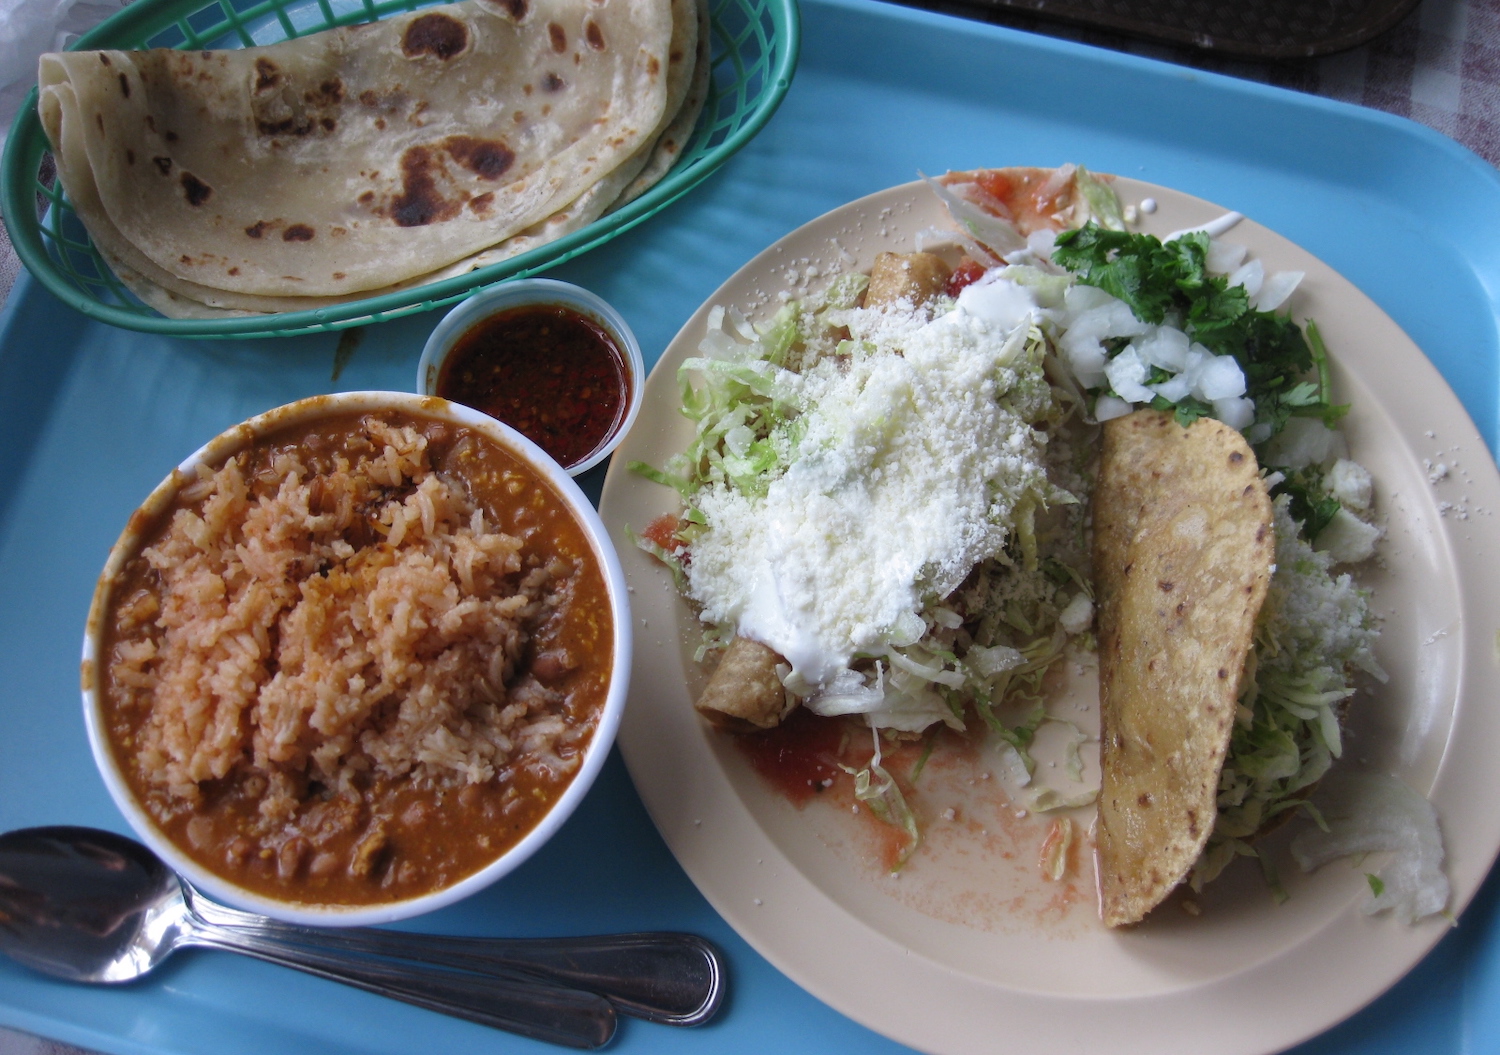 Plate of food from San Diego Mexican restaurant and taco shop Los Cuatros Milpas in Barrio Logan